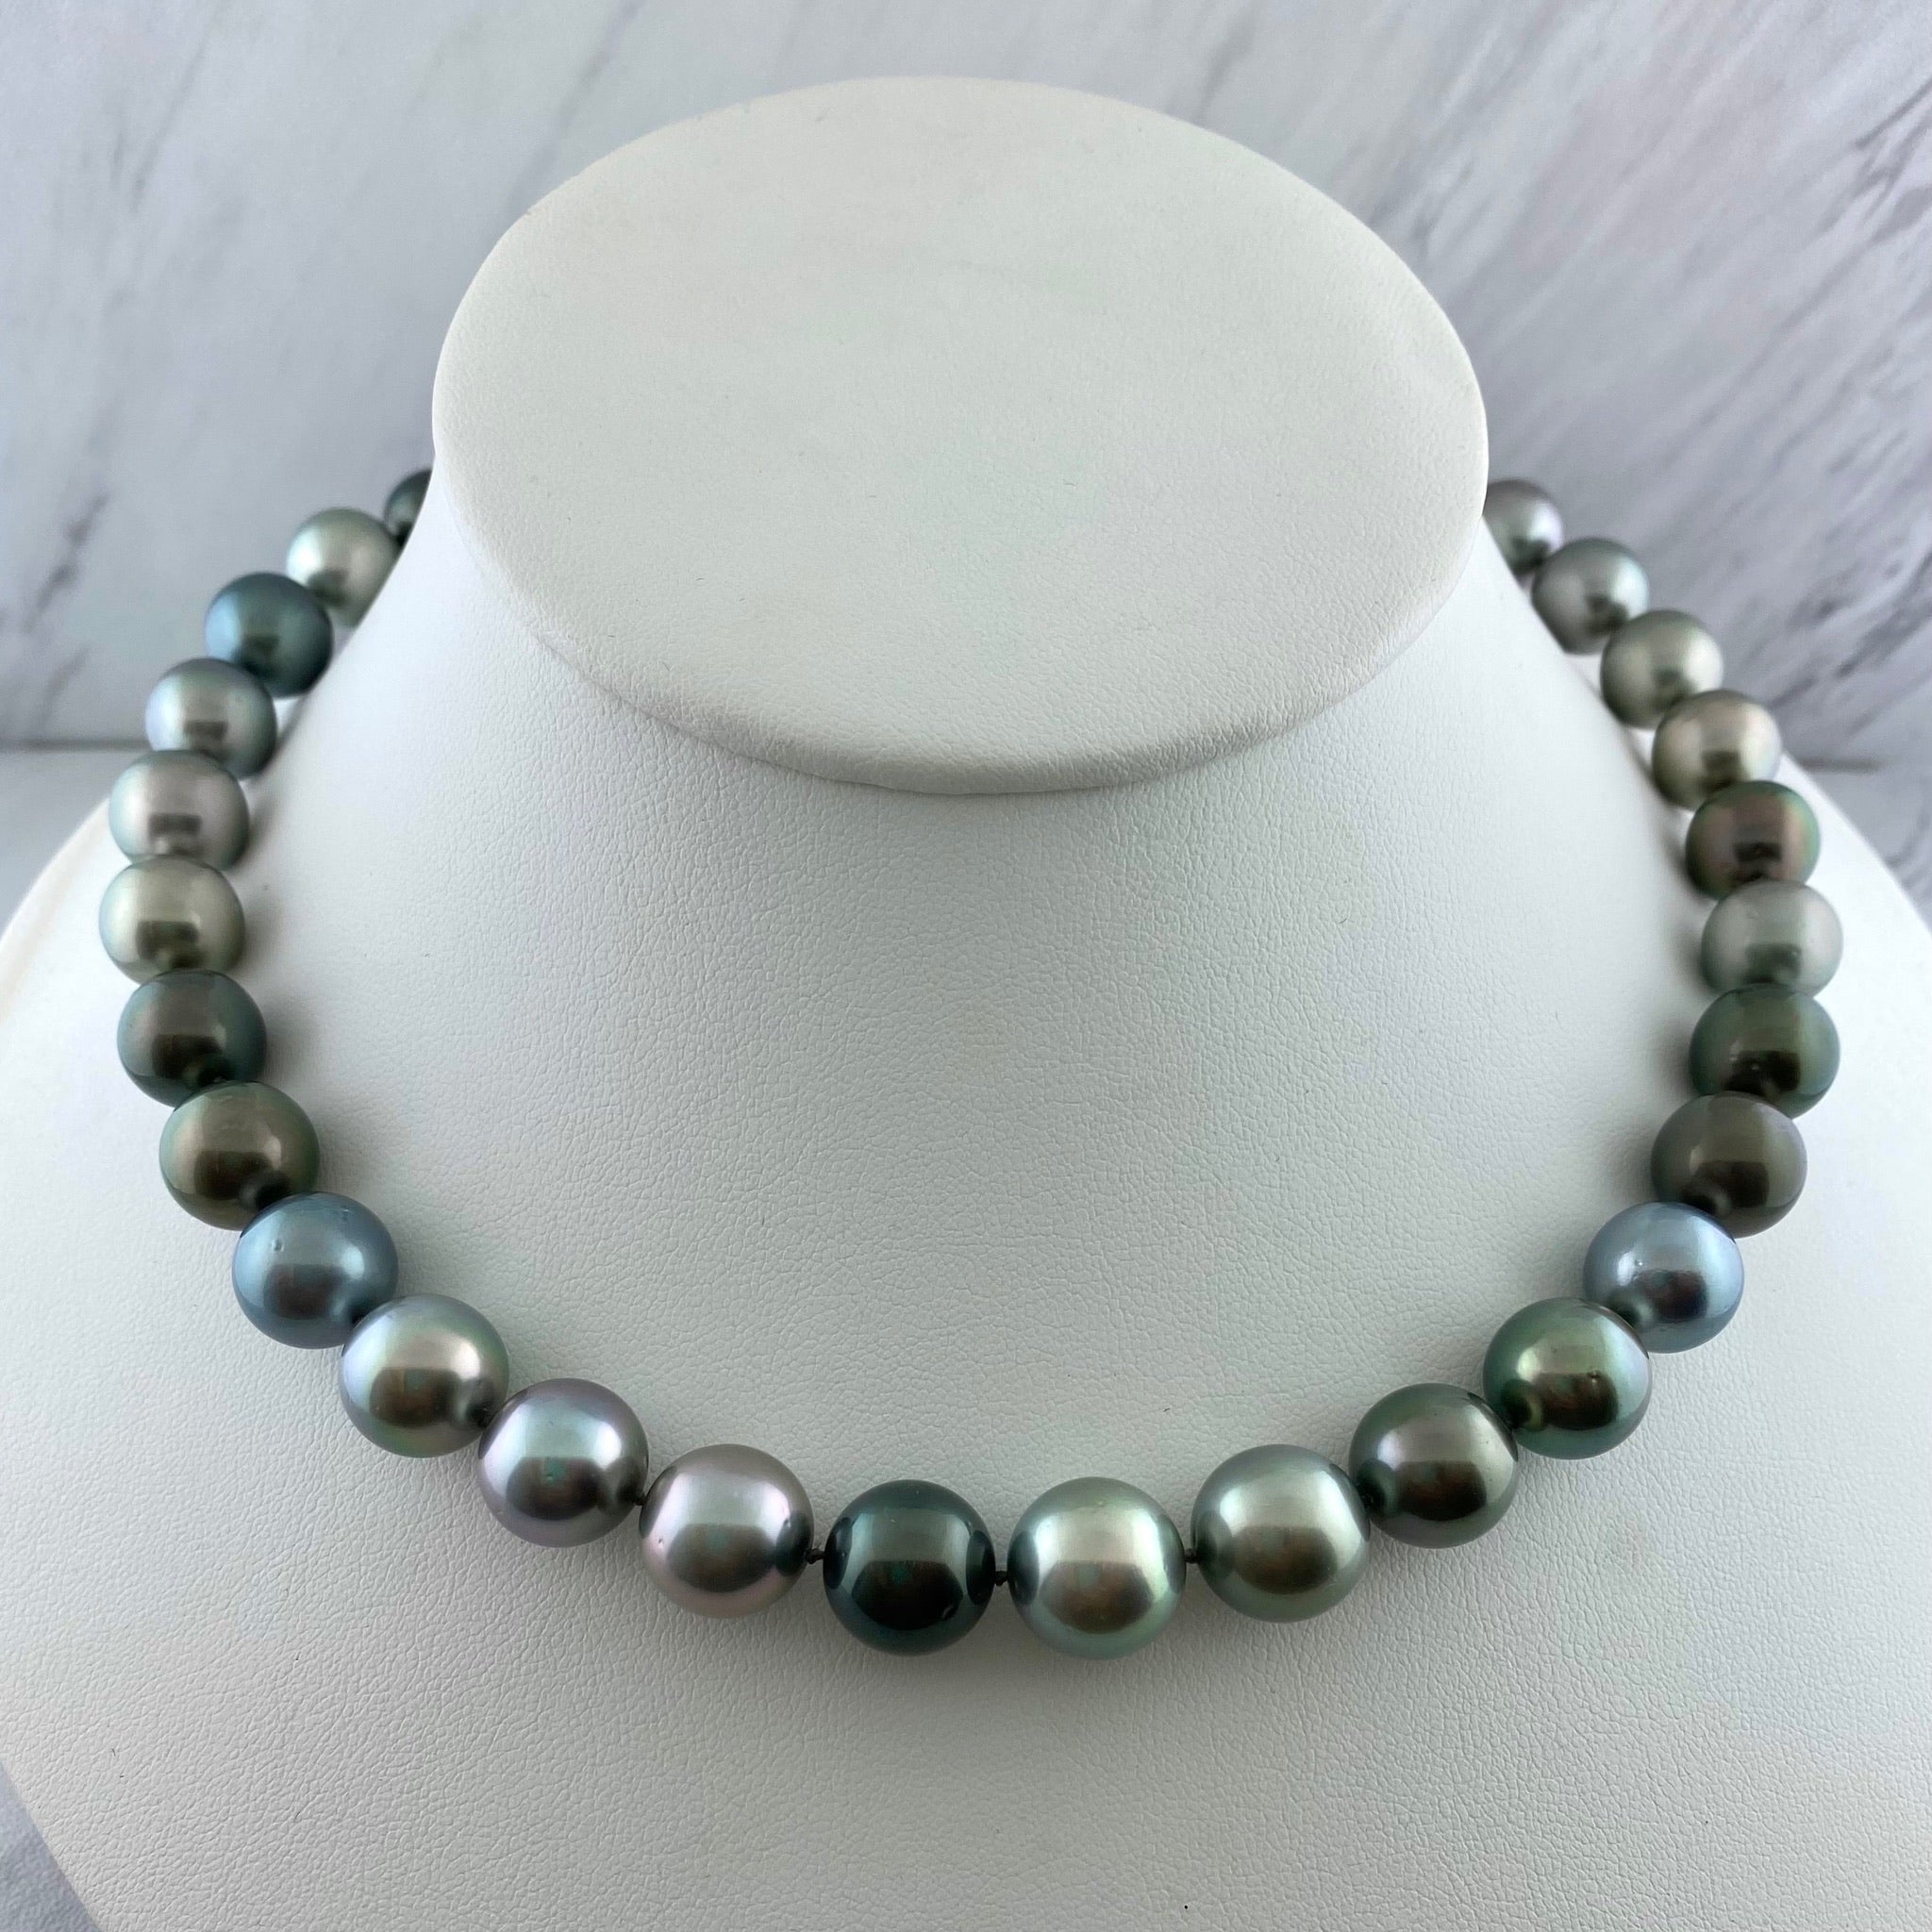 Multi-Colored South Sea and Tahitian Pearl Necklace 1986-43 | Grants Jewelry